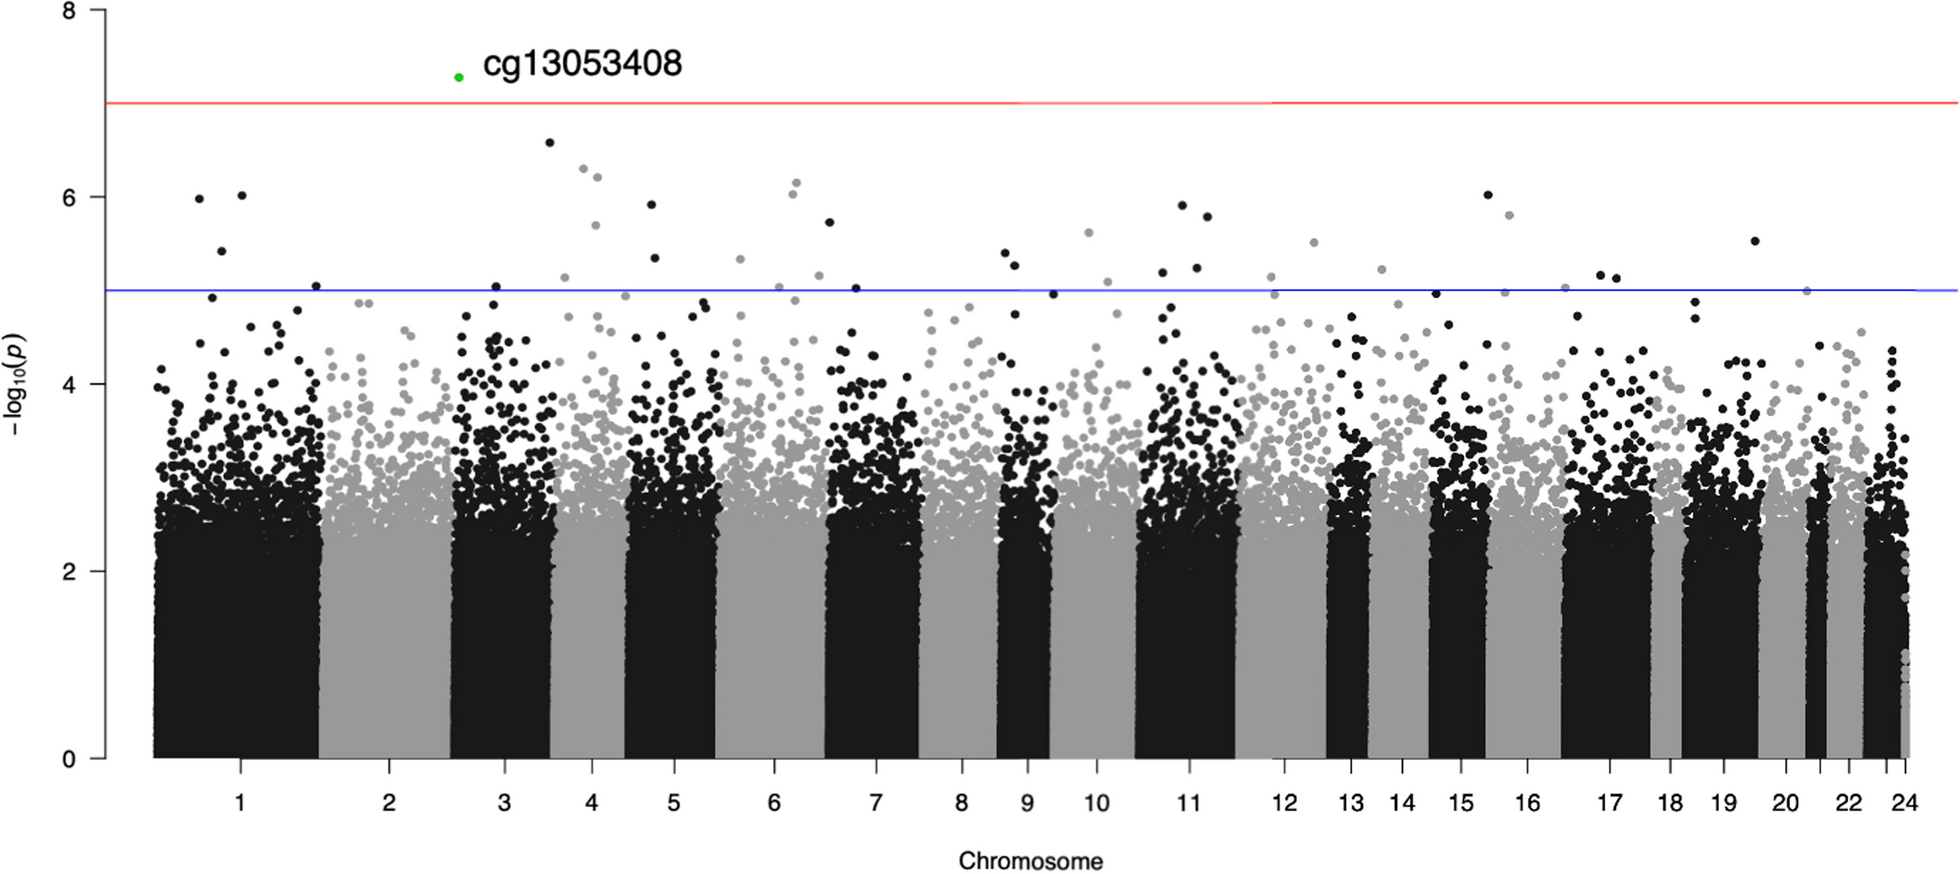 An EWAS of dementia biomarkers and their associations with age, African ancestry, and PTSD